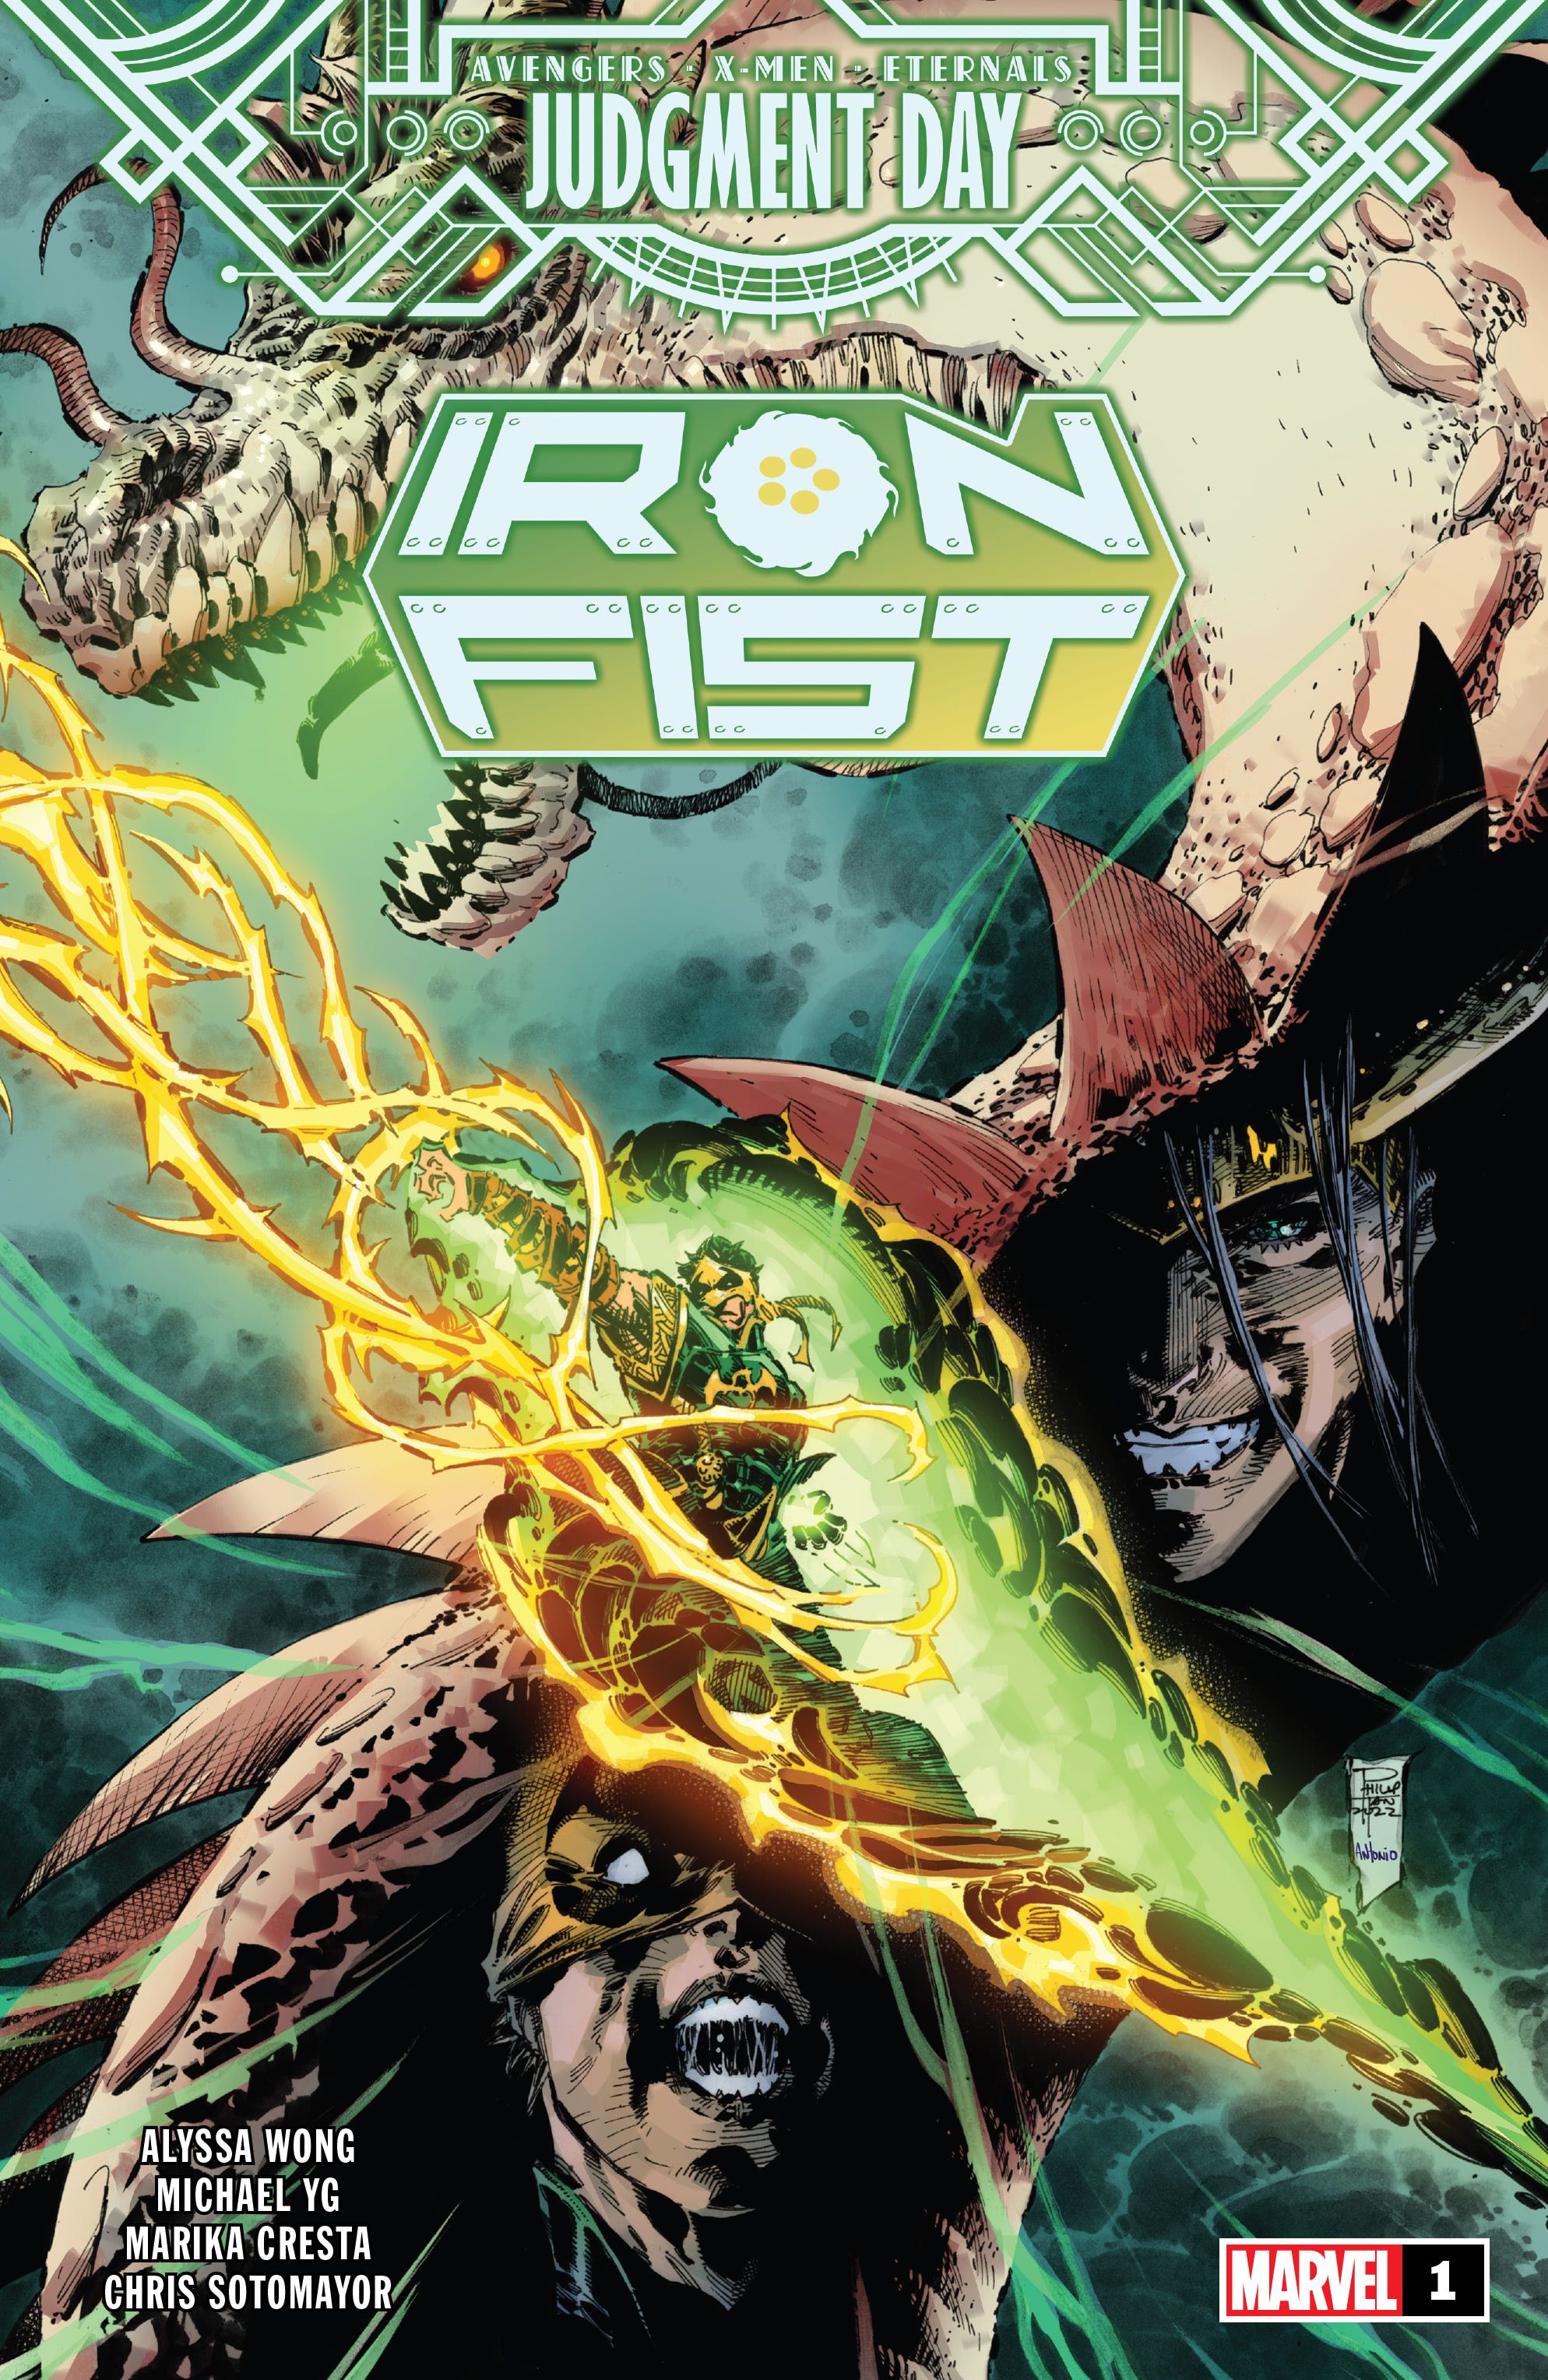 Thoughts on the new Iron Fist Lin Lie : r/Marvel